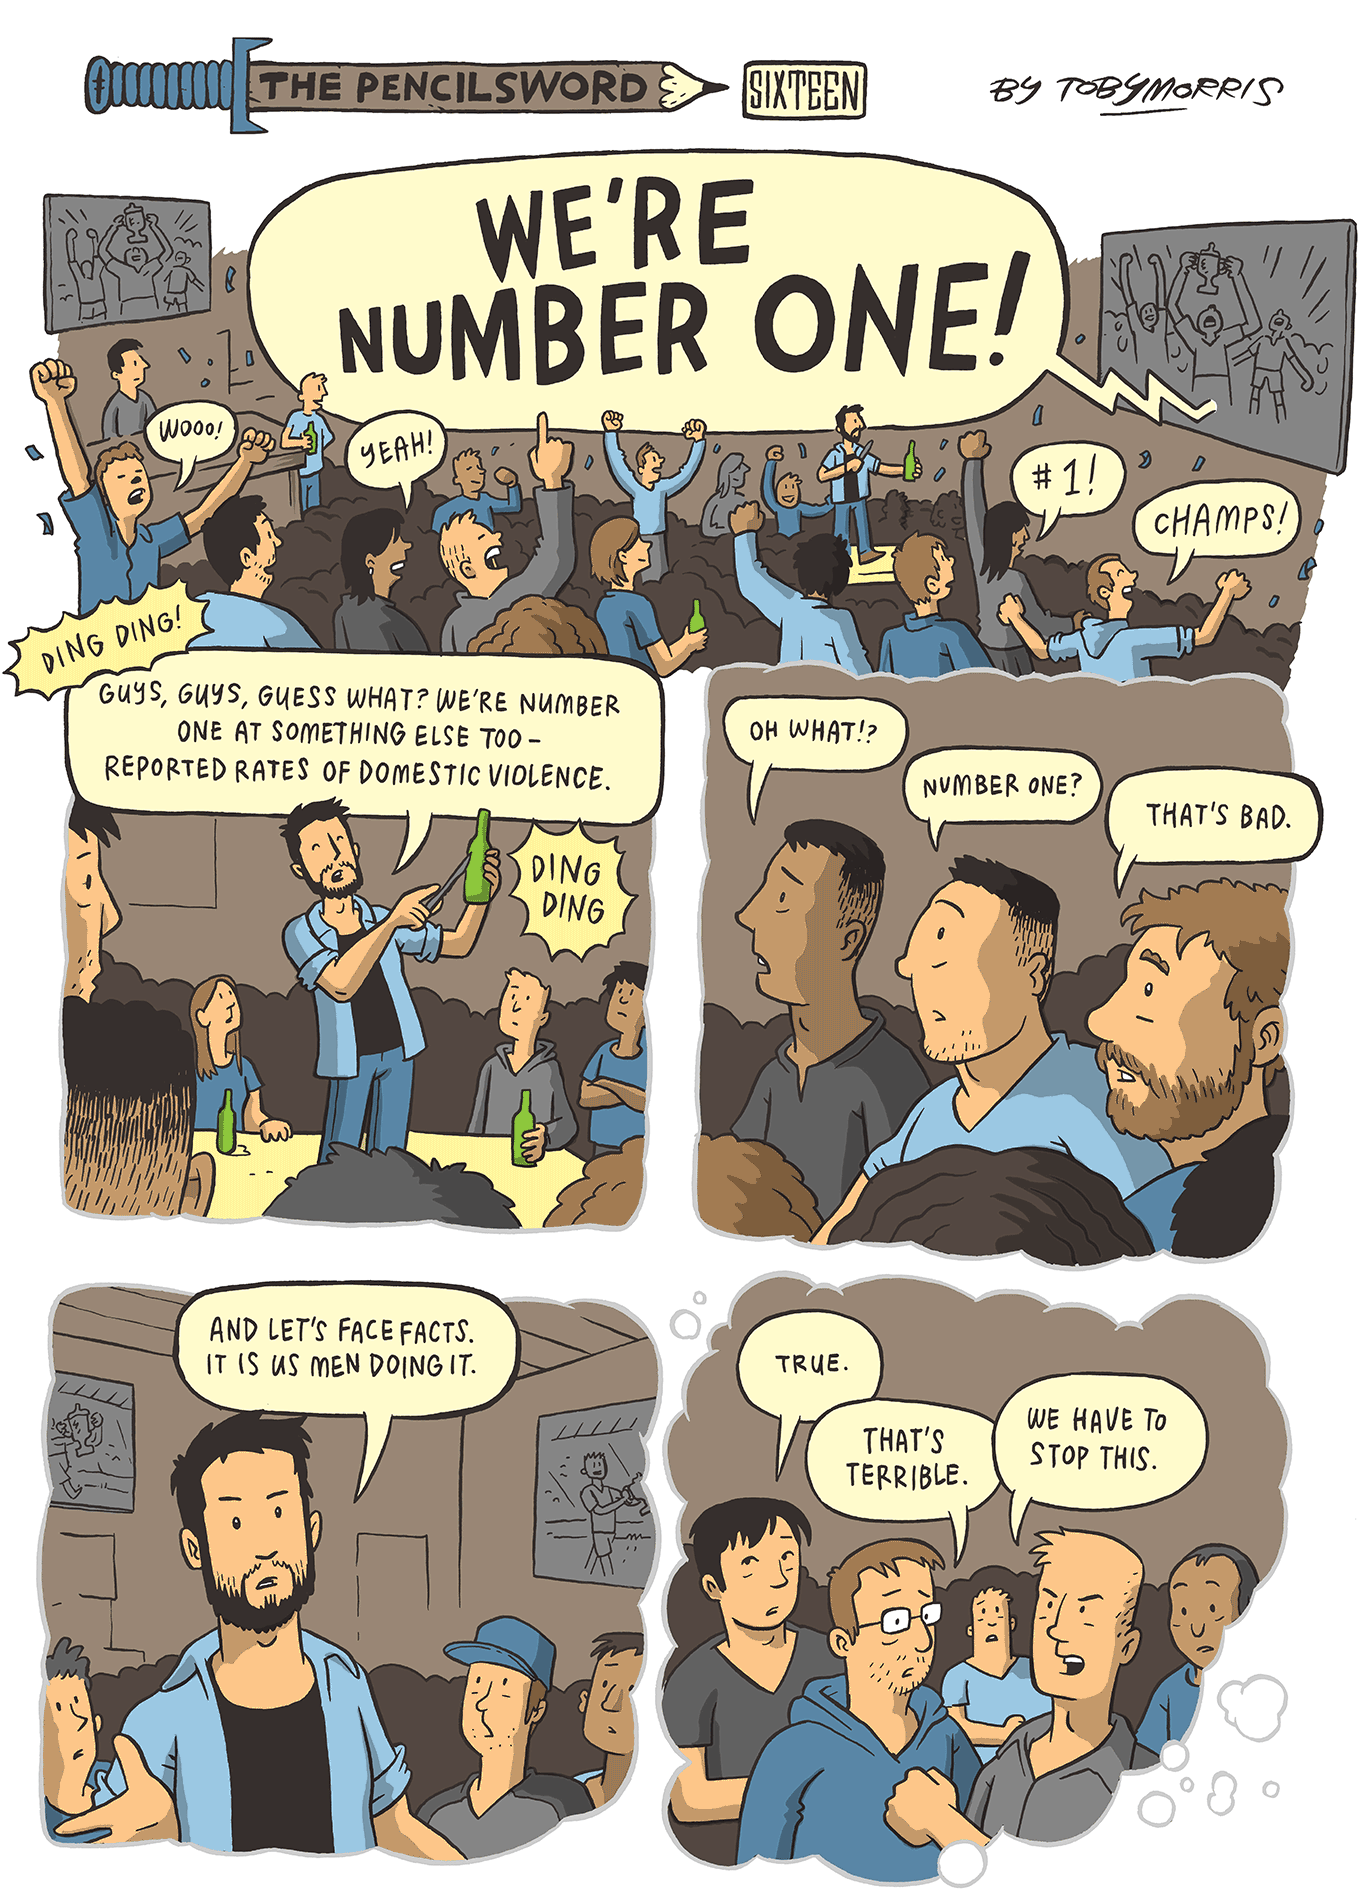 Comic strip with five panels showing a group of men celebrating at being number one, when one of them reminds the rest that we're also number one when it comes to domestic violence and all agree that's a bad thing.